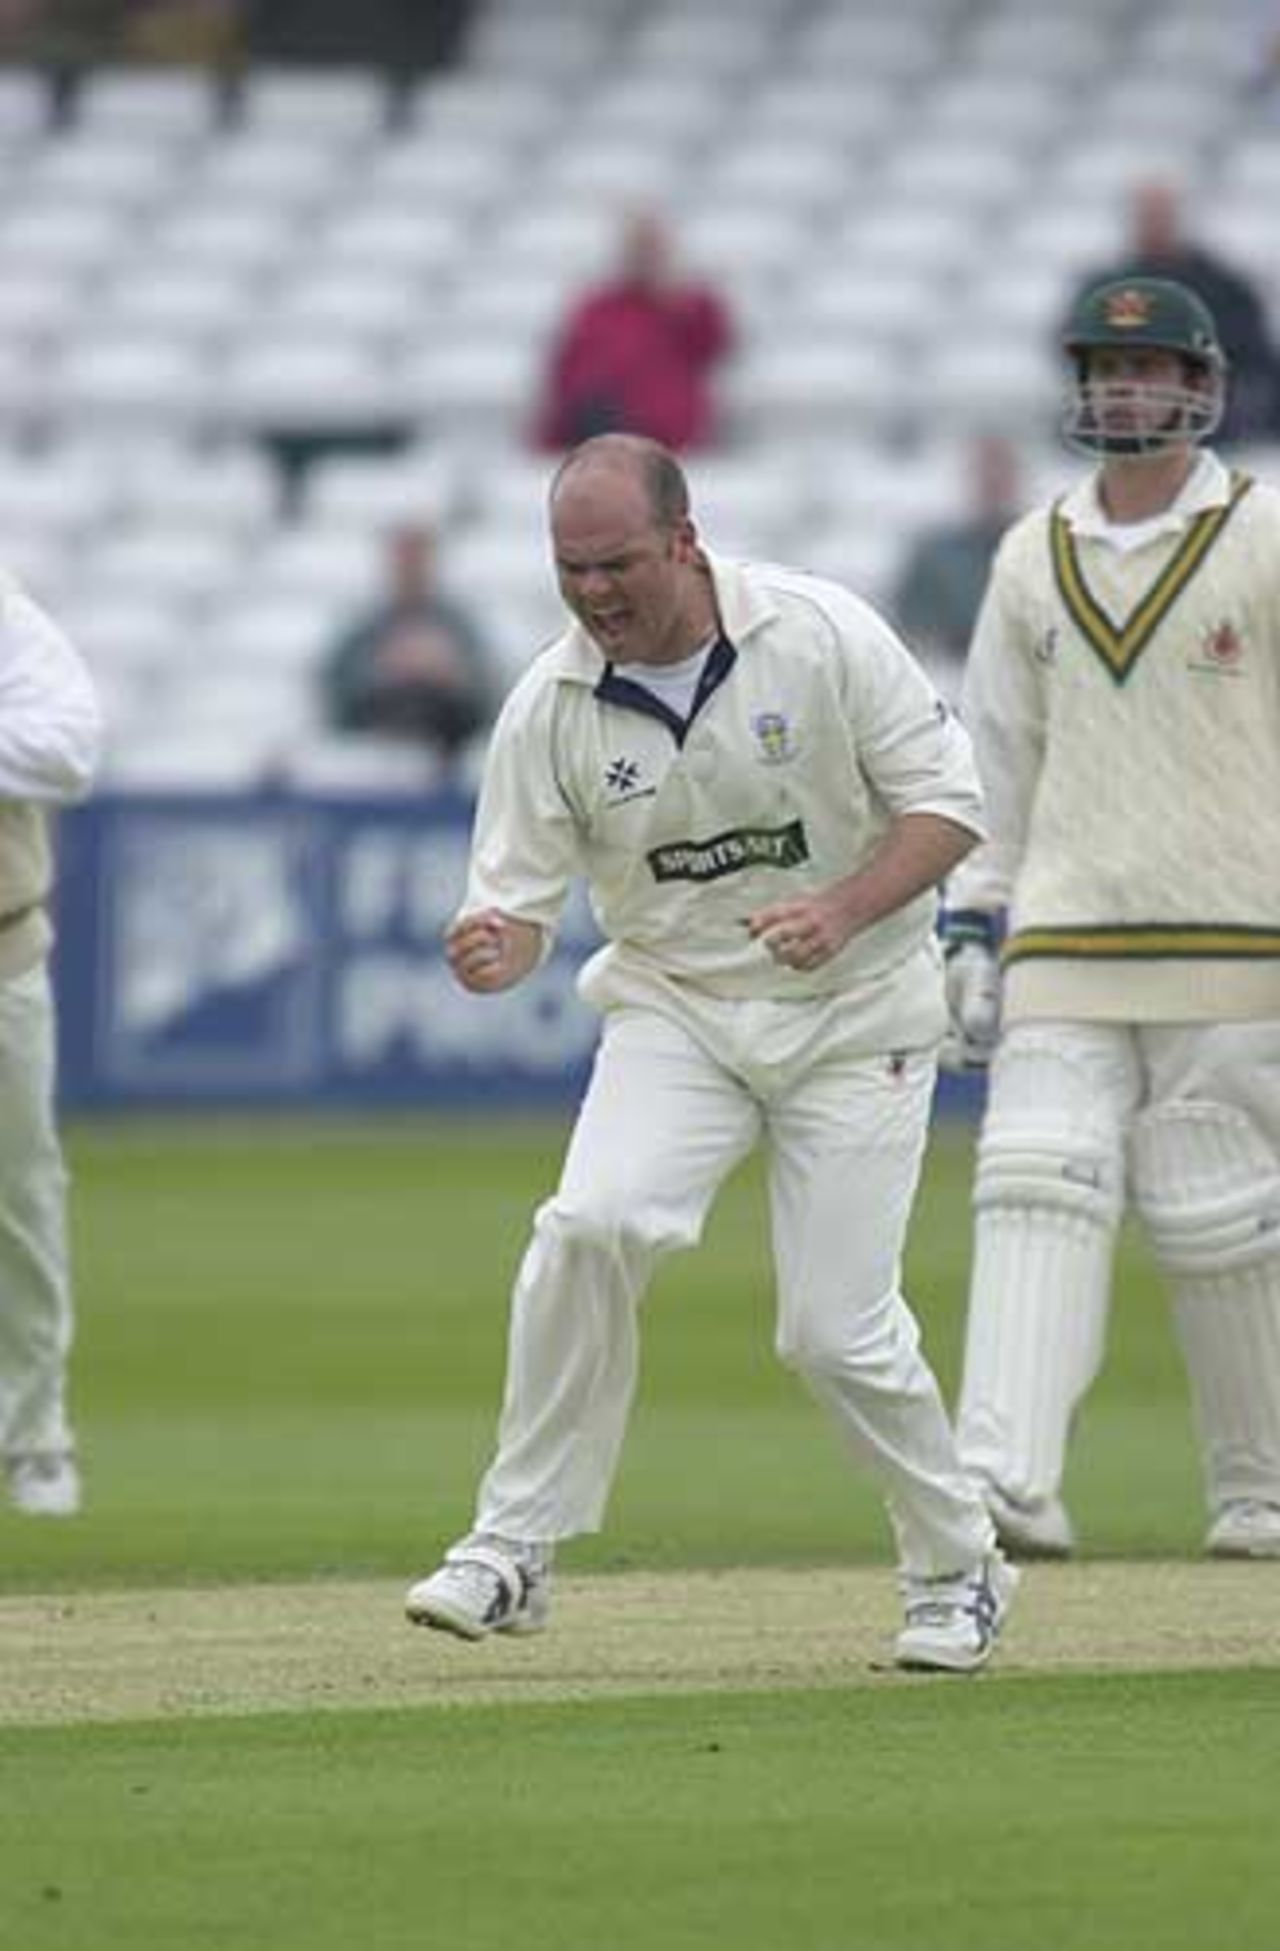 Neil Killeen is delighted to get Pietersen out lbw for 6